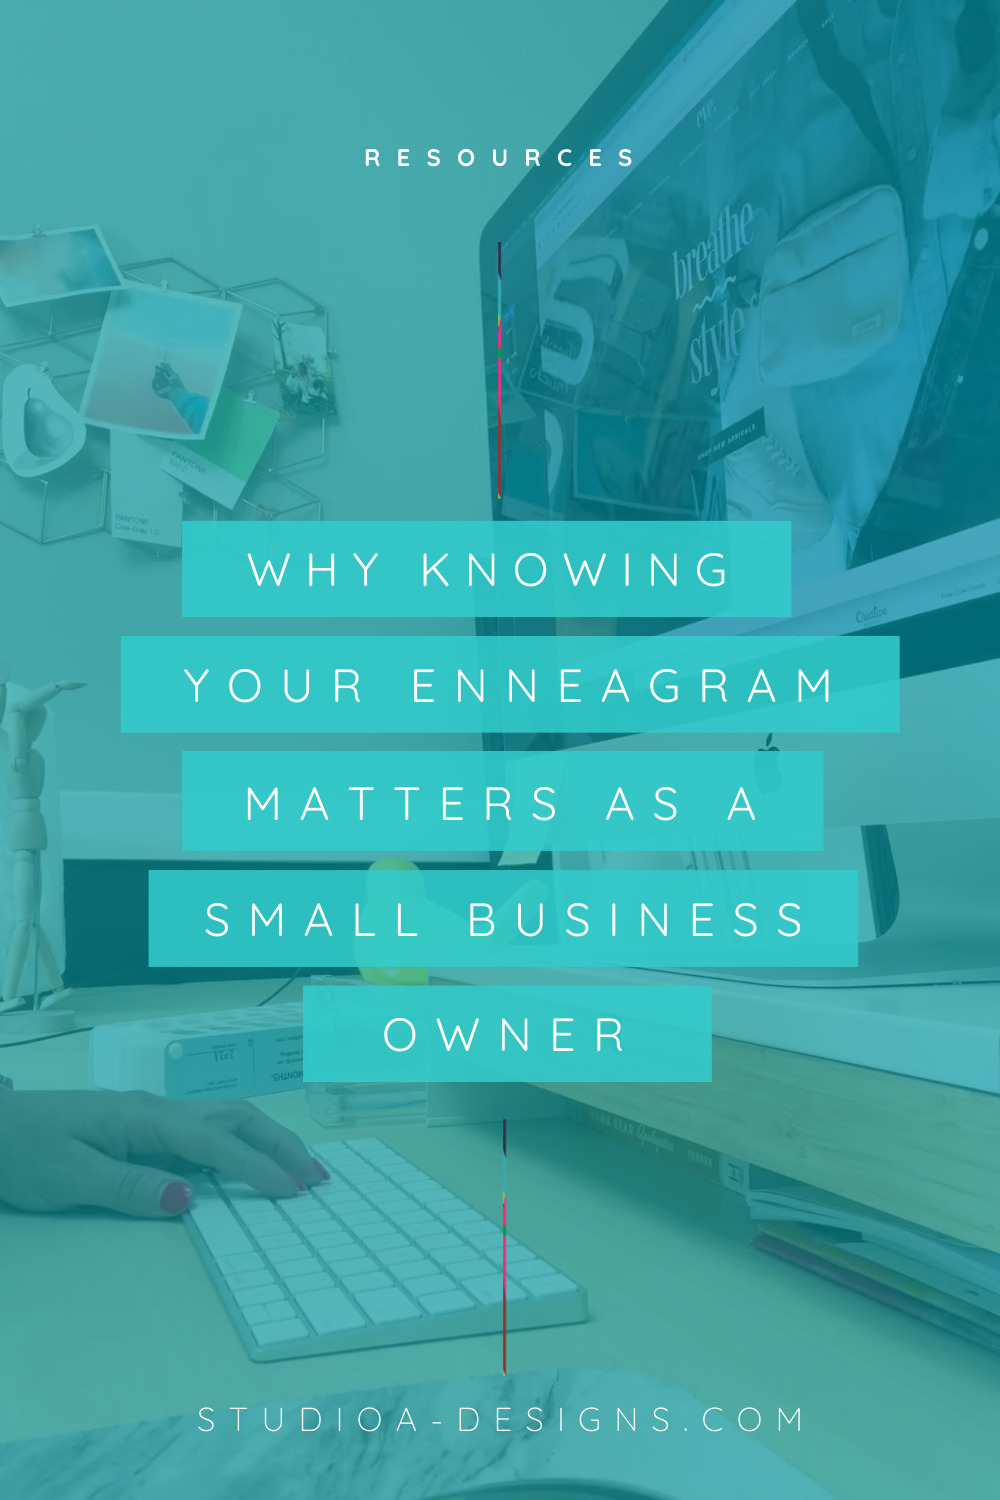 Why Knowing Your Enneagram Matters as a Small Business Owner